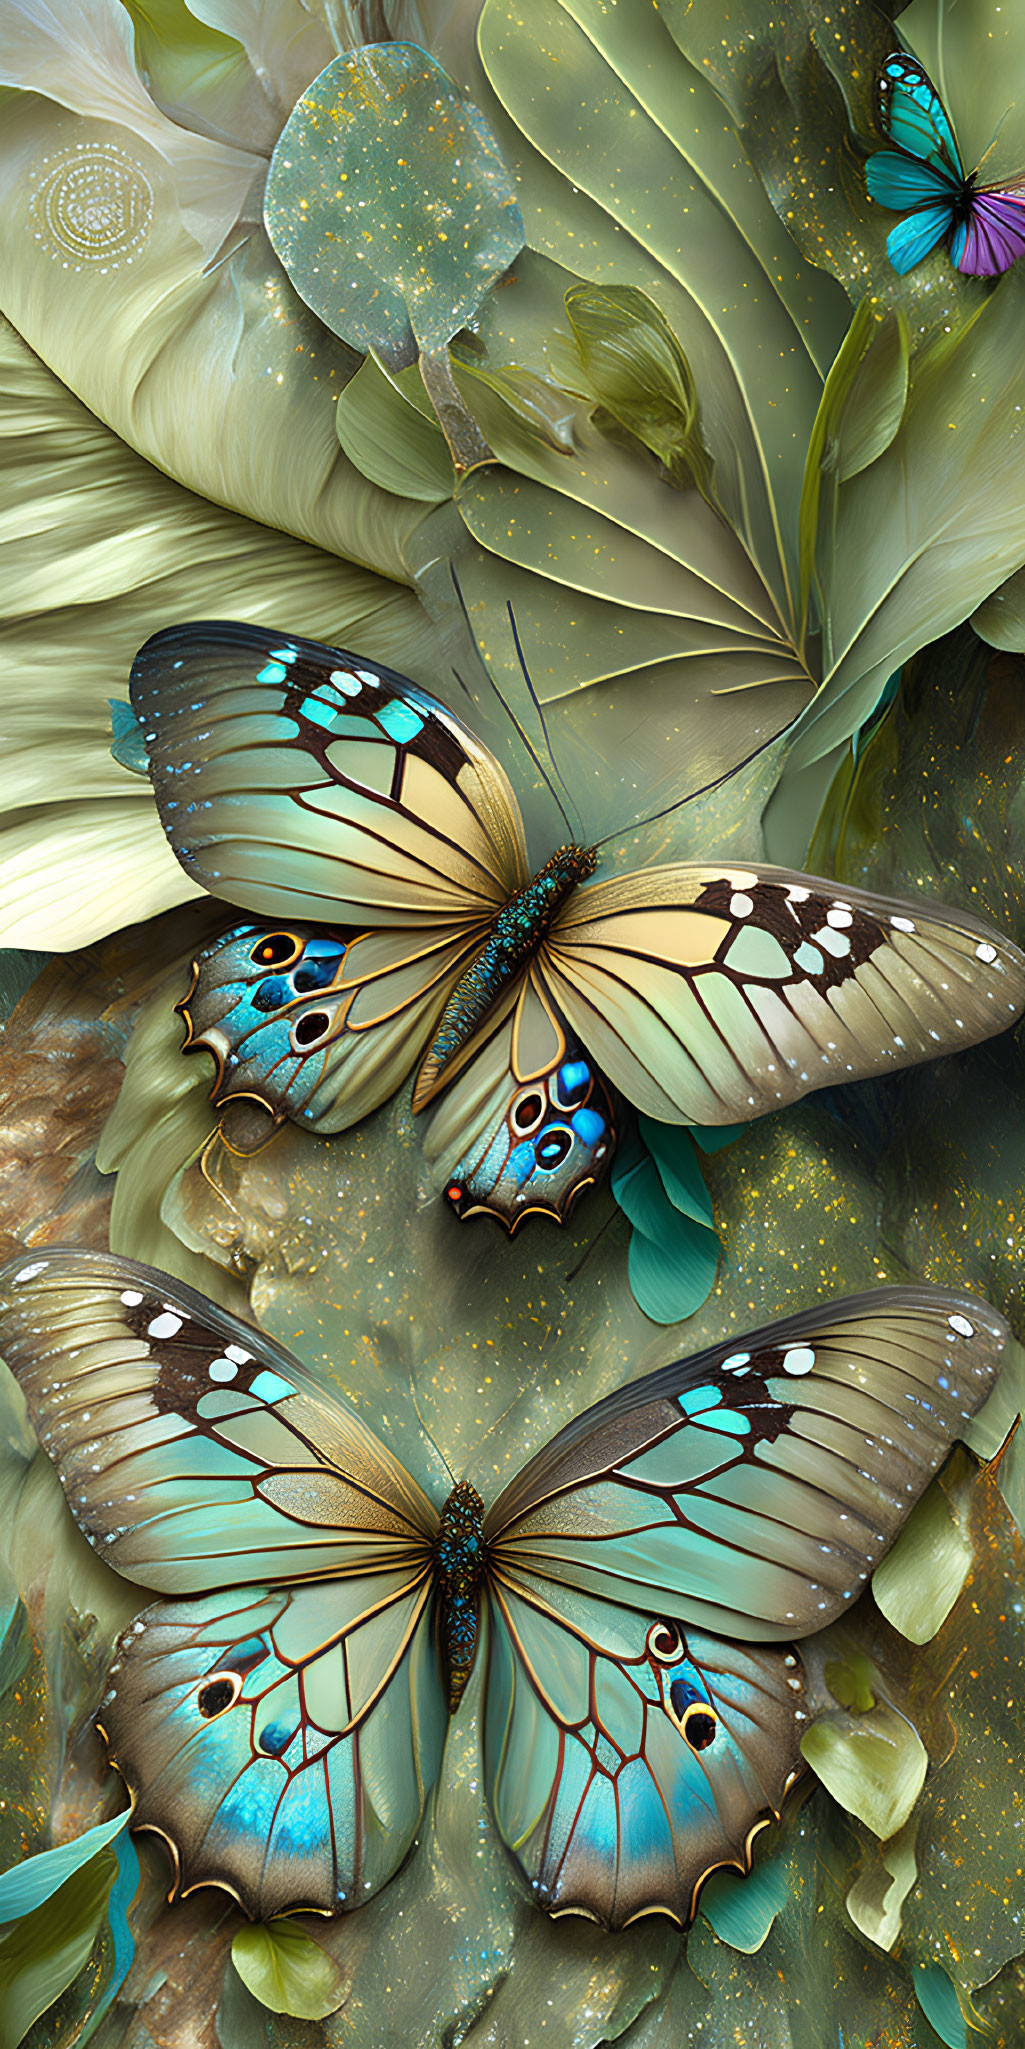 Detailed digital art: Blue and brown butterflies among lush greenery and floral motifs.